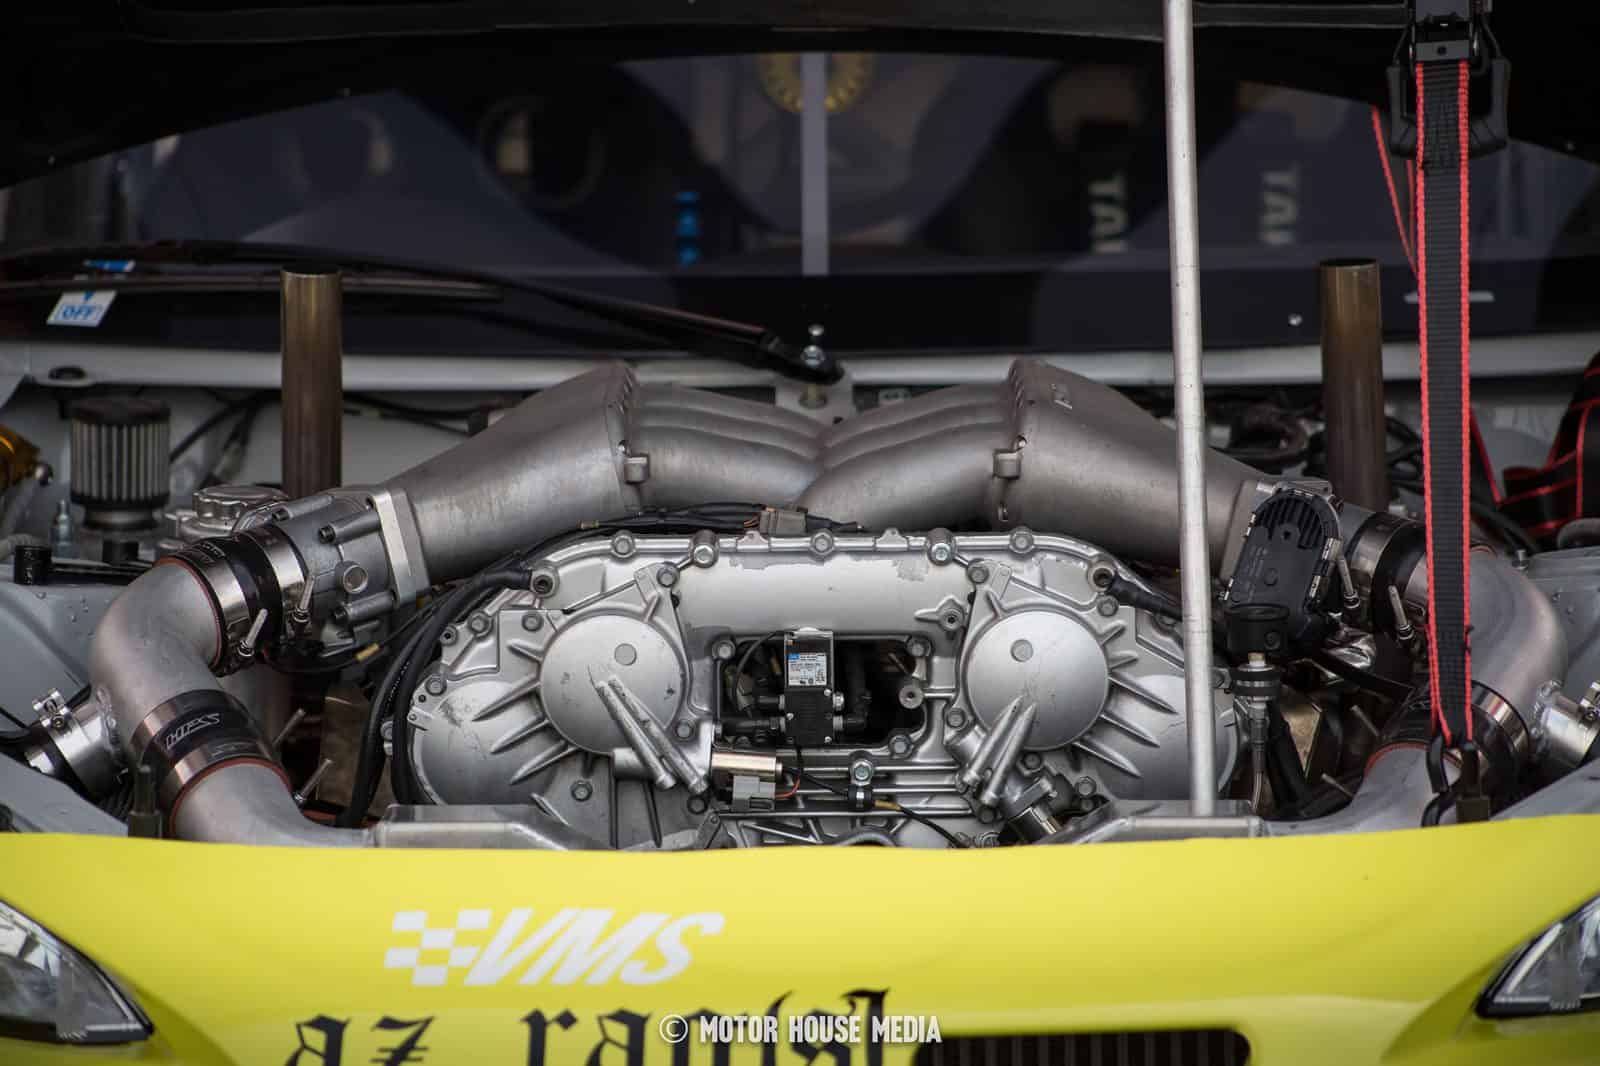 Massive horsepower with this radical engine in a formula drift car